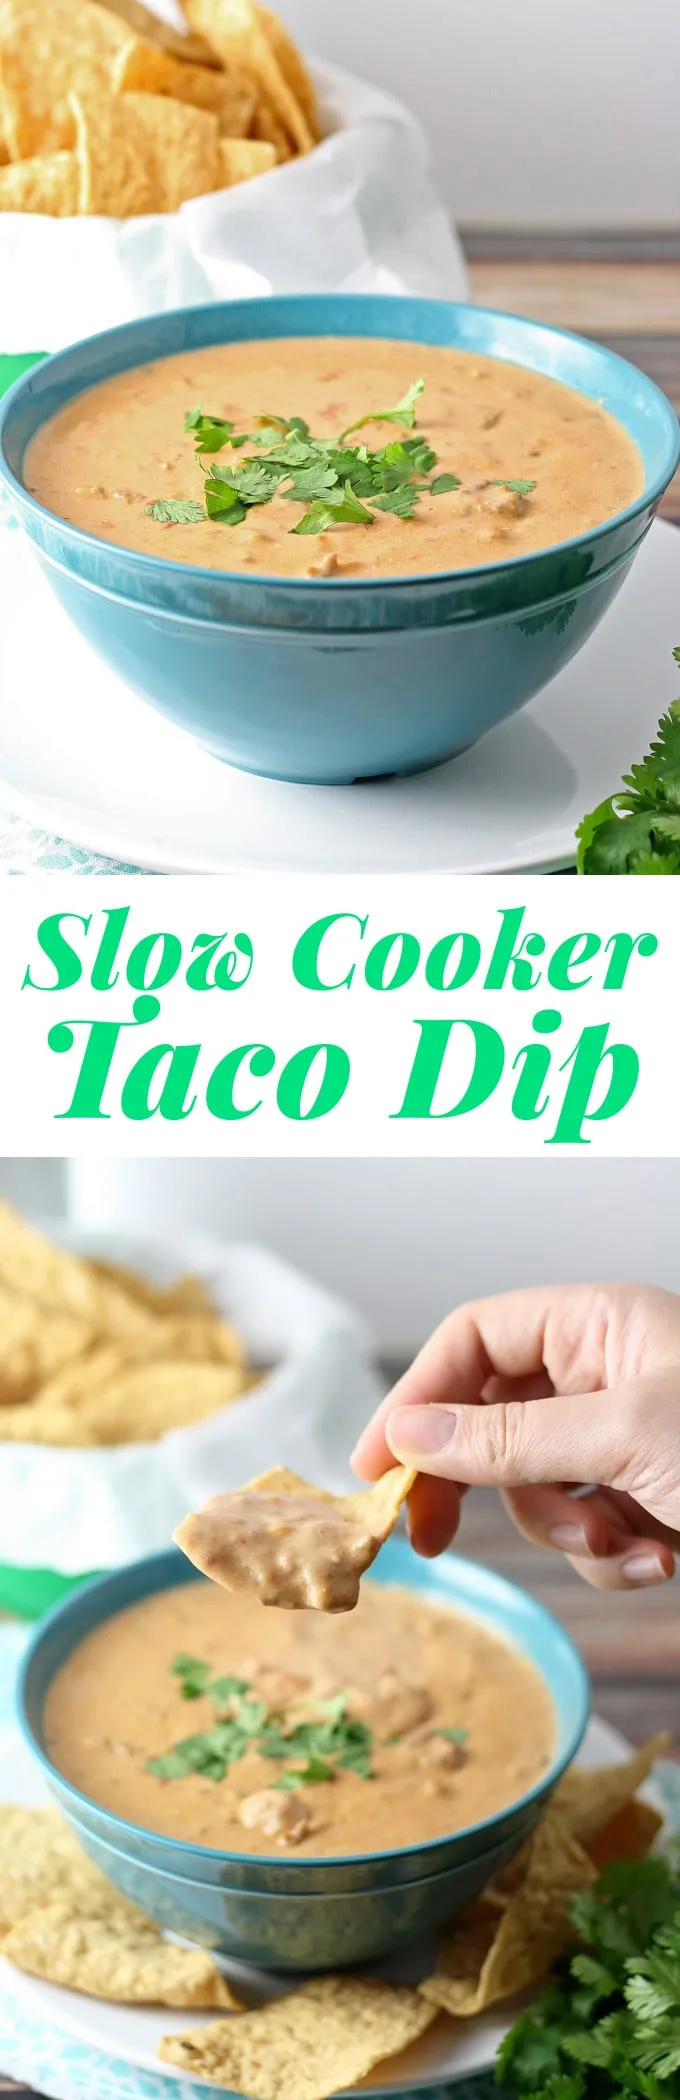 It's time to start thinking about football and tailgating! This recipe for slow cooker taco dip would be perfect for fall. | honeyandbirch.com